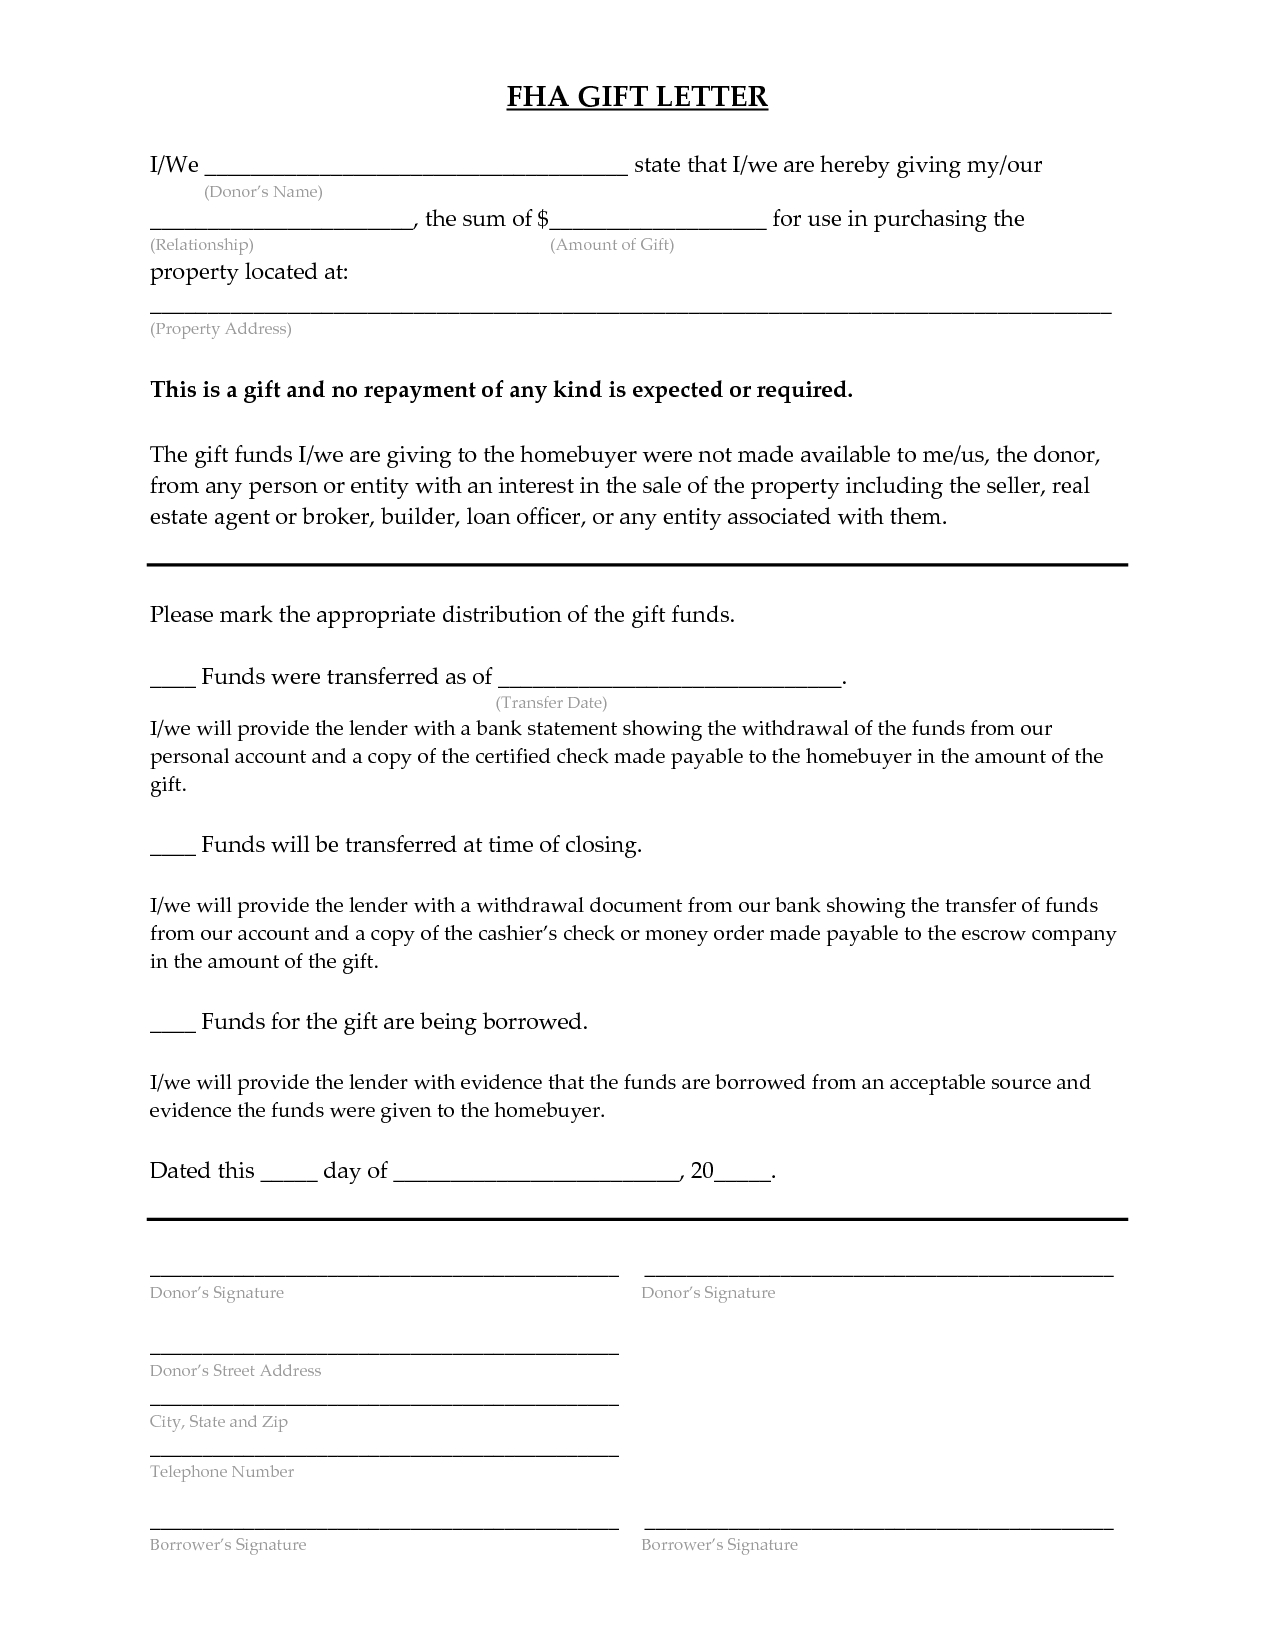 Gift Letter Template Uk - How to Write A Gift Letter Gallery Letter format formal Sample